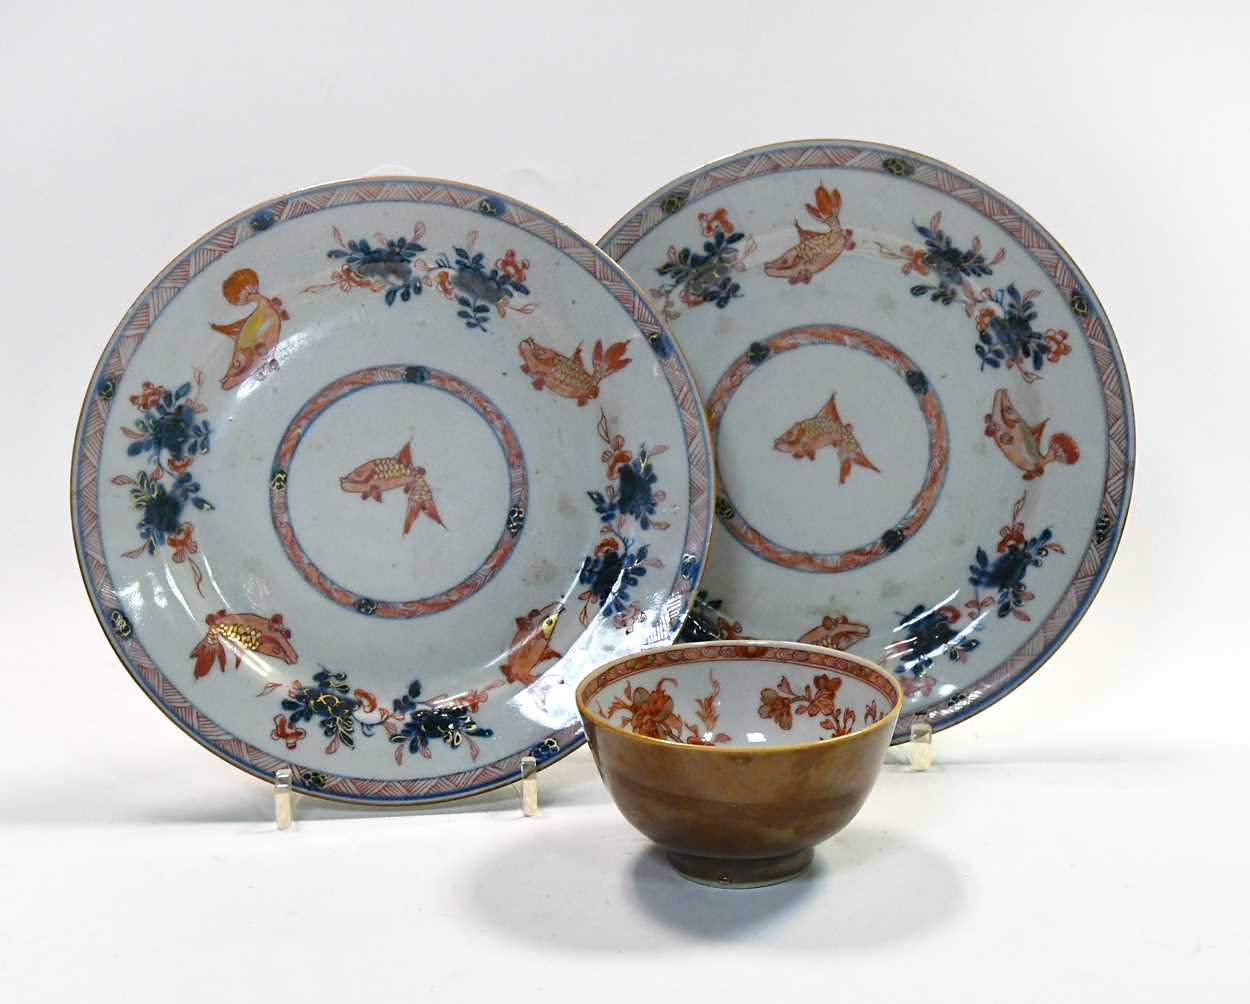 A pair of Chinese 'Imari' porcelain fish plates, Qing Dynasty, early 18th century